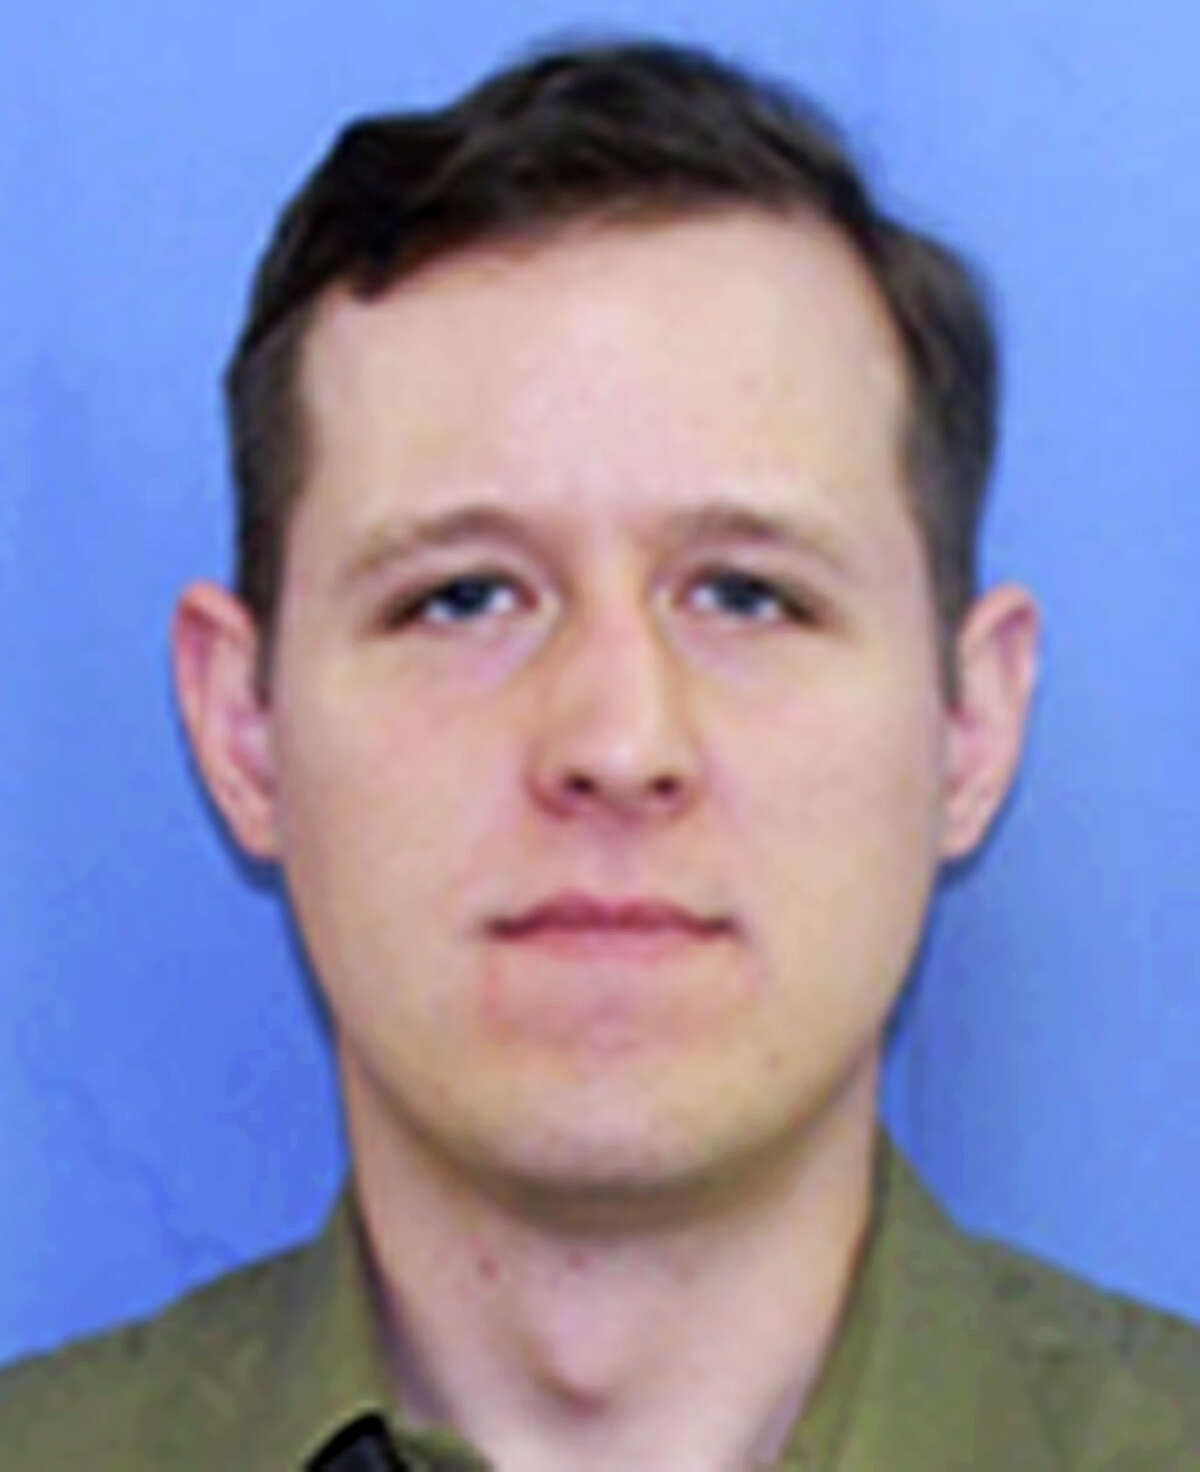 This undated PennDOT identification photo released Tuesday, Sept. 16, 2014, by the Pennsylvania State Police shows Eric Matthew Frein, 31, of Canadensis, Penn., being sought in Friday’s shooting that left one trooper dead and another critically wounded at a state police barracks in Blooming Grove.